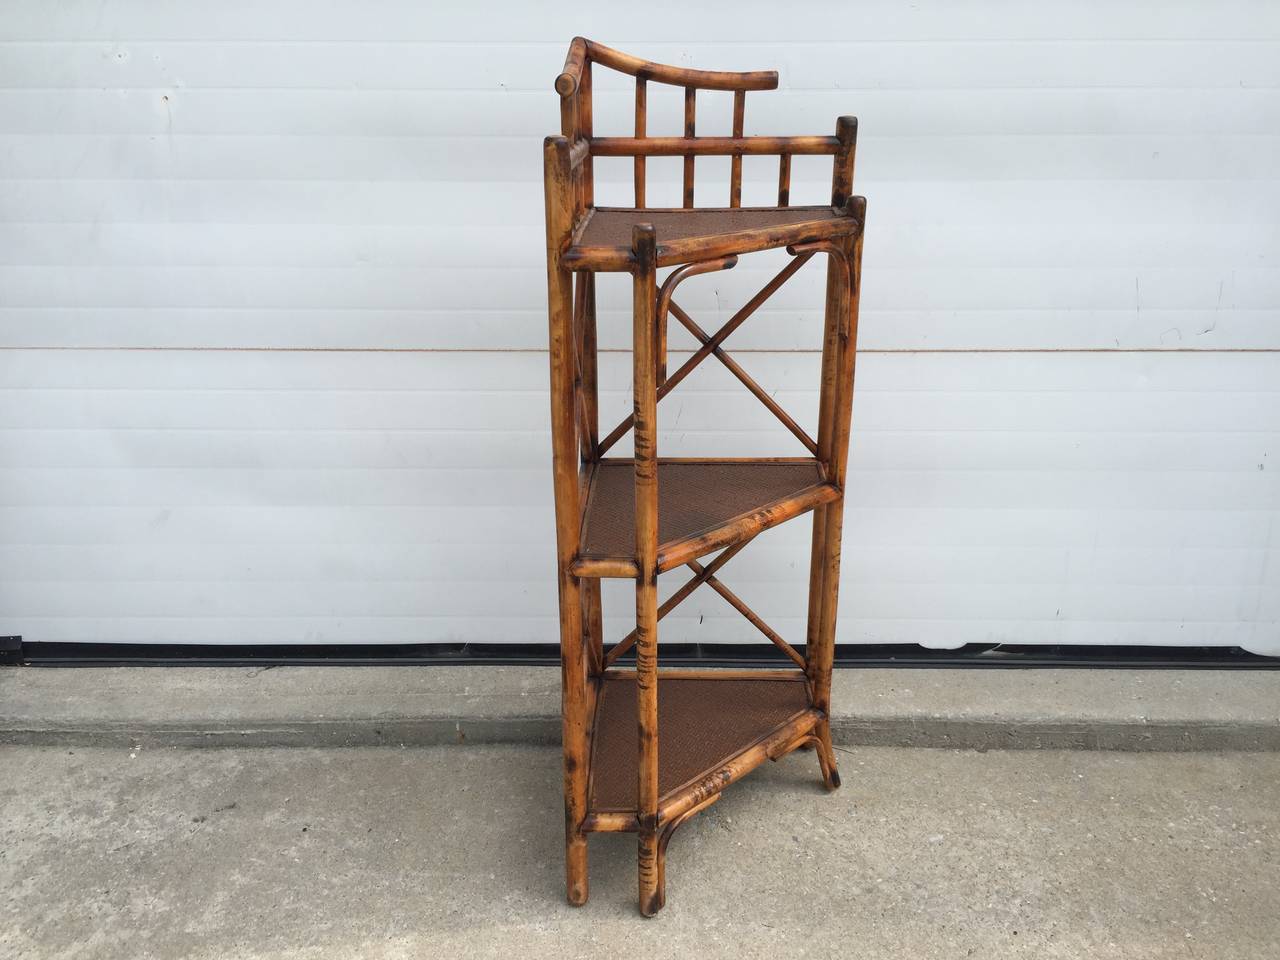 This handy corner etagere has three levels of rattan shelving to choose from.  The X cross supports make the shelves incredibly stable.  Built in 1930's England, this is a beautiful piece!